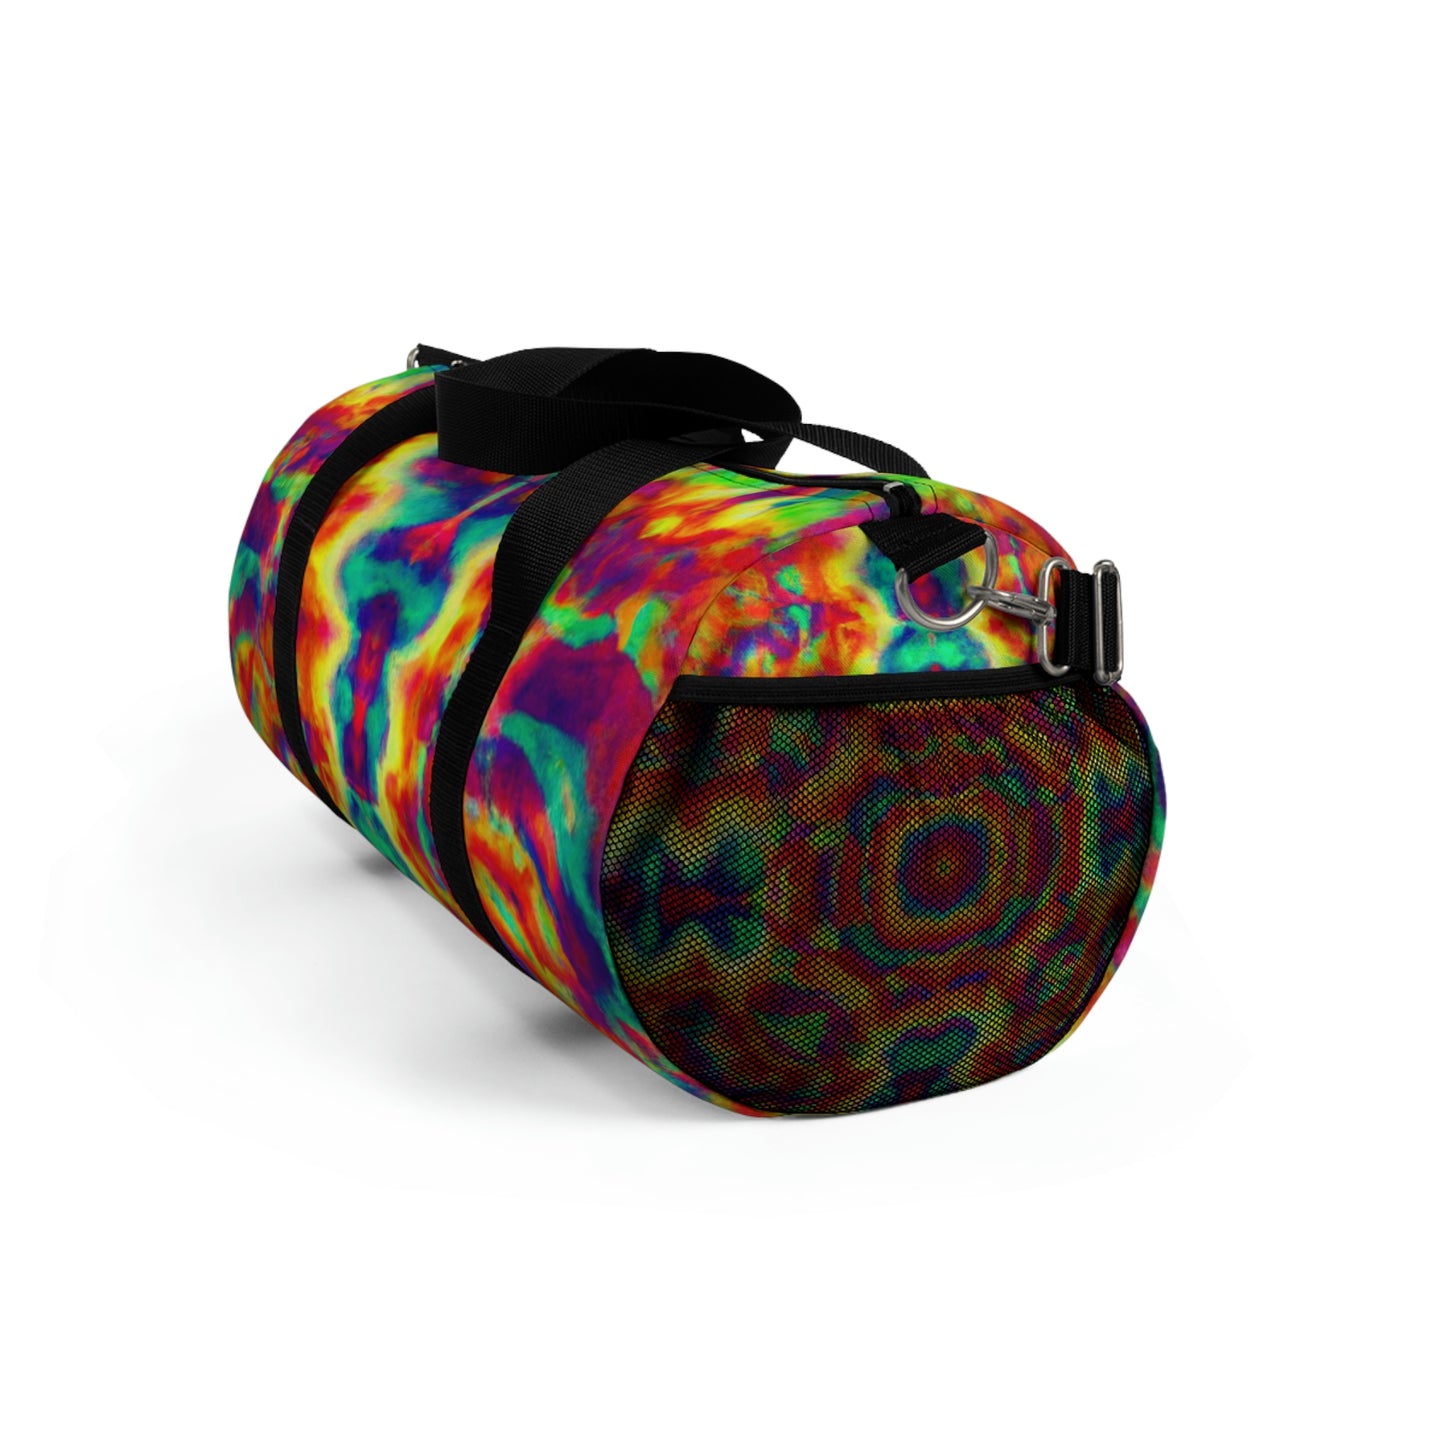 Hollychester - Psychedelic Duffel Bag